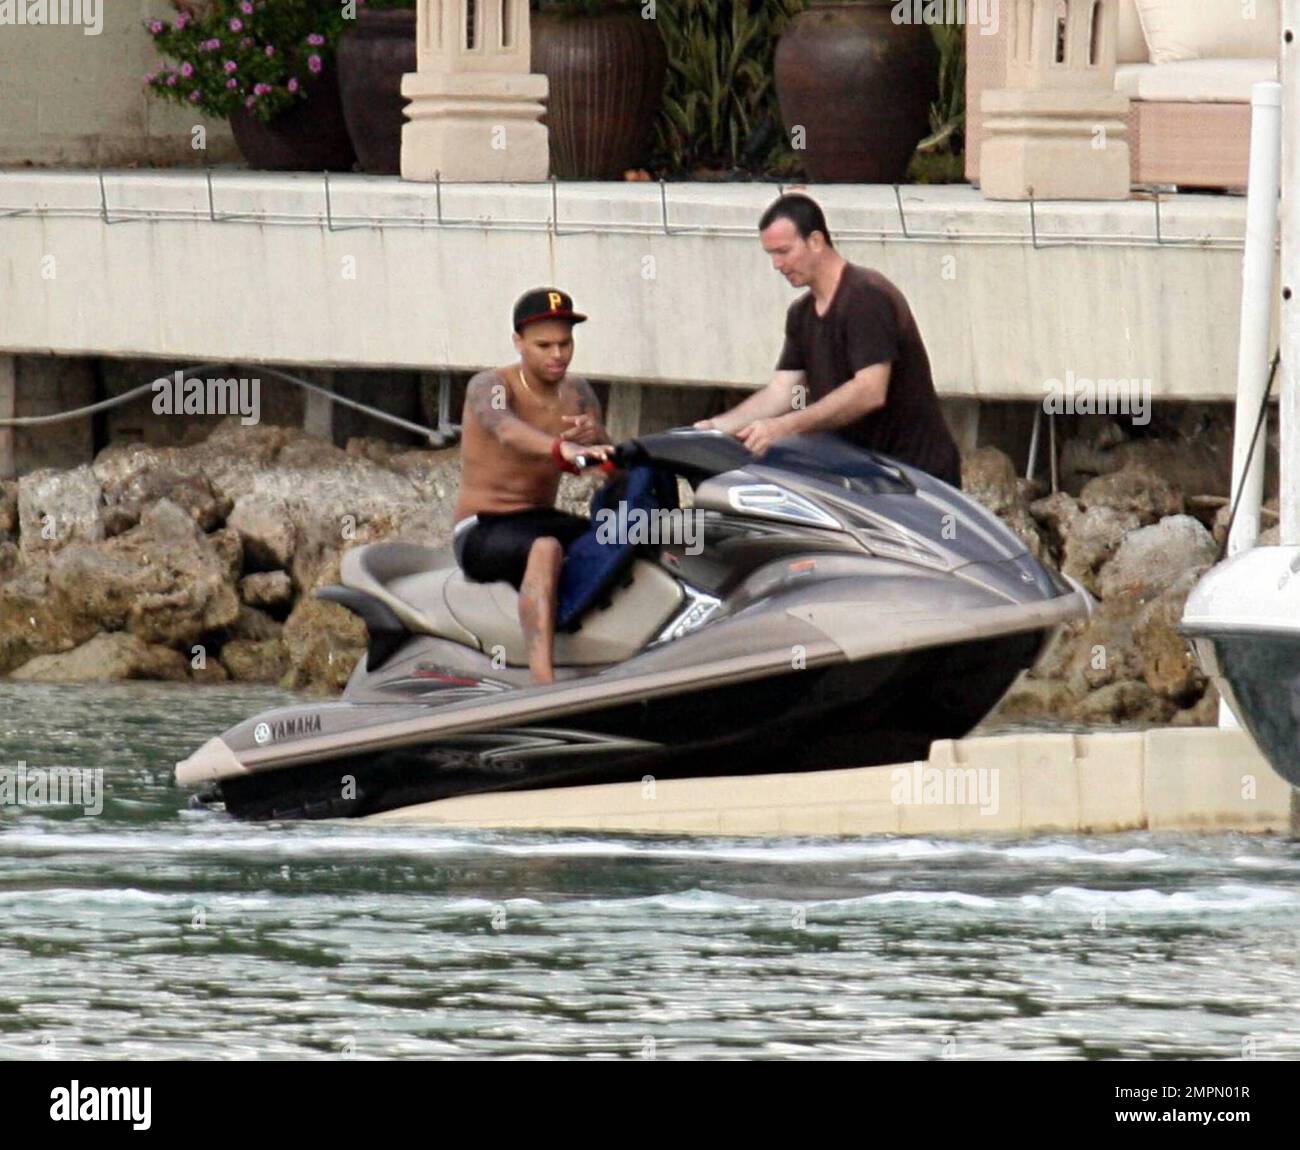 Chris Brown was all smiles and enjoying himself on a jetski after being reunited with girlfriend Rihanna at P Diddy's $50 million dollar Star Island mansion the previous night.  The reconciliation comes just two weeks after the domestic violence incident between Rihanna and boyfriend Chris that left Rihanna with cuts and bruises to her face and body.  The tattooed singer spent the day partying at P Diddy's with an entourage of girls and guys including one of Rihanna and Jay Z's bodyguards. Brown enjoyed himself on a jetski with a friend followed closely by security in a boat in the bay of Miam Stock Photo